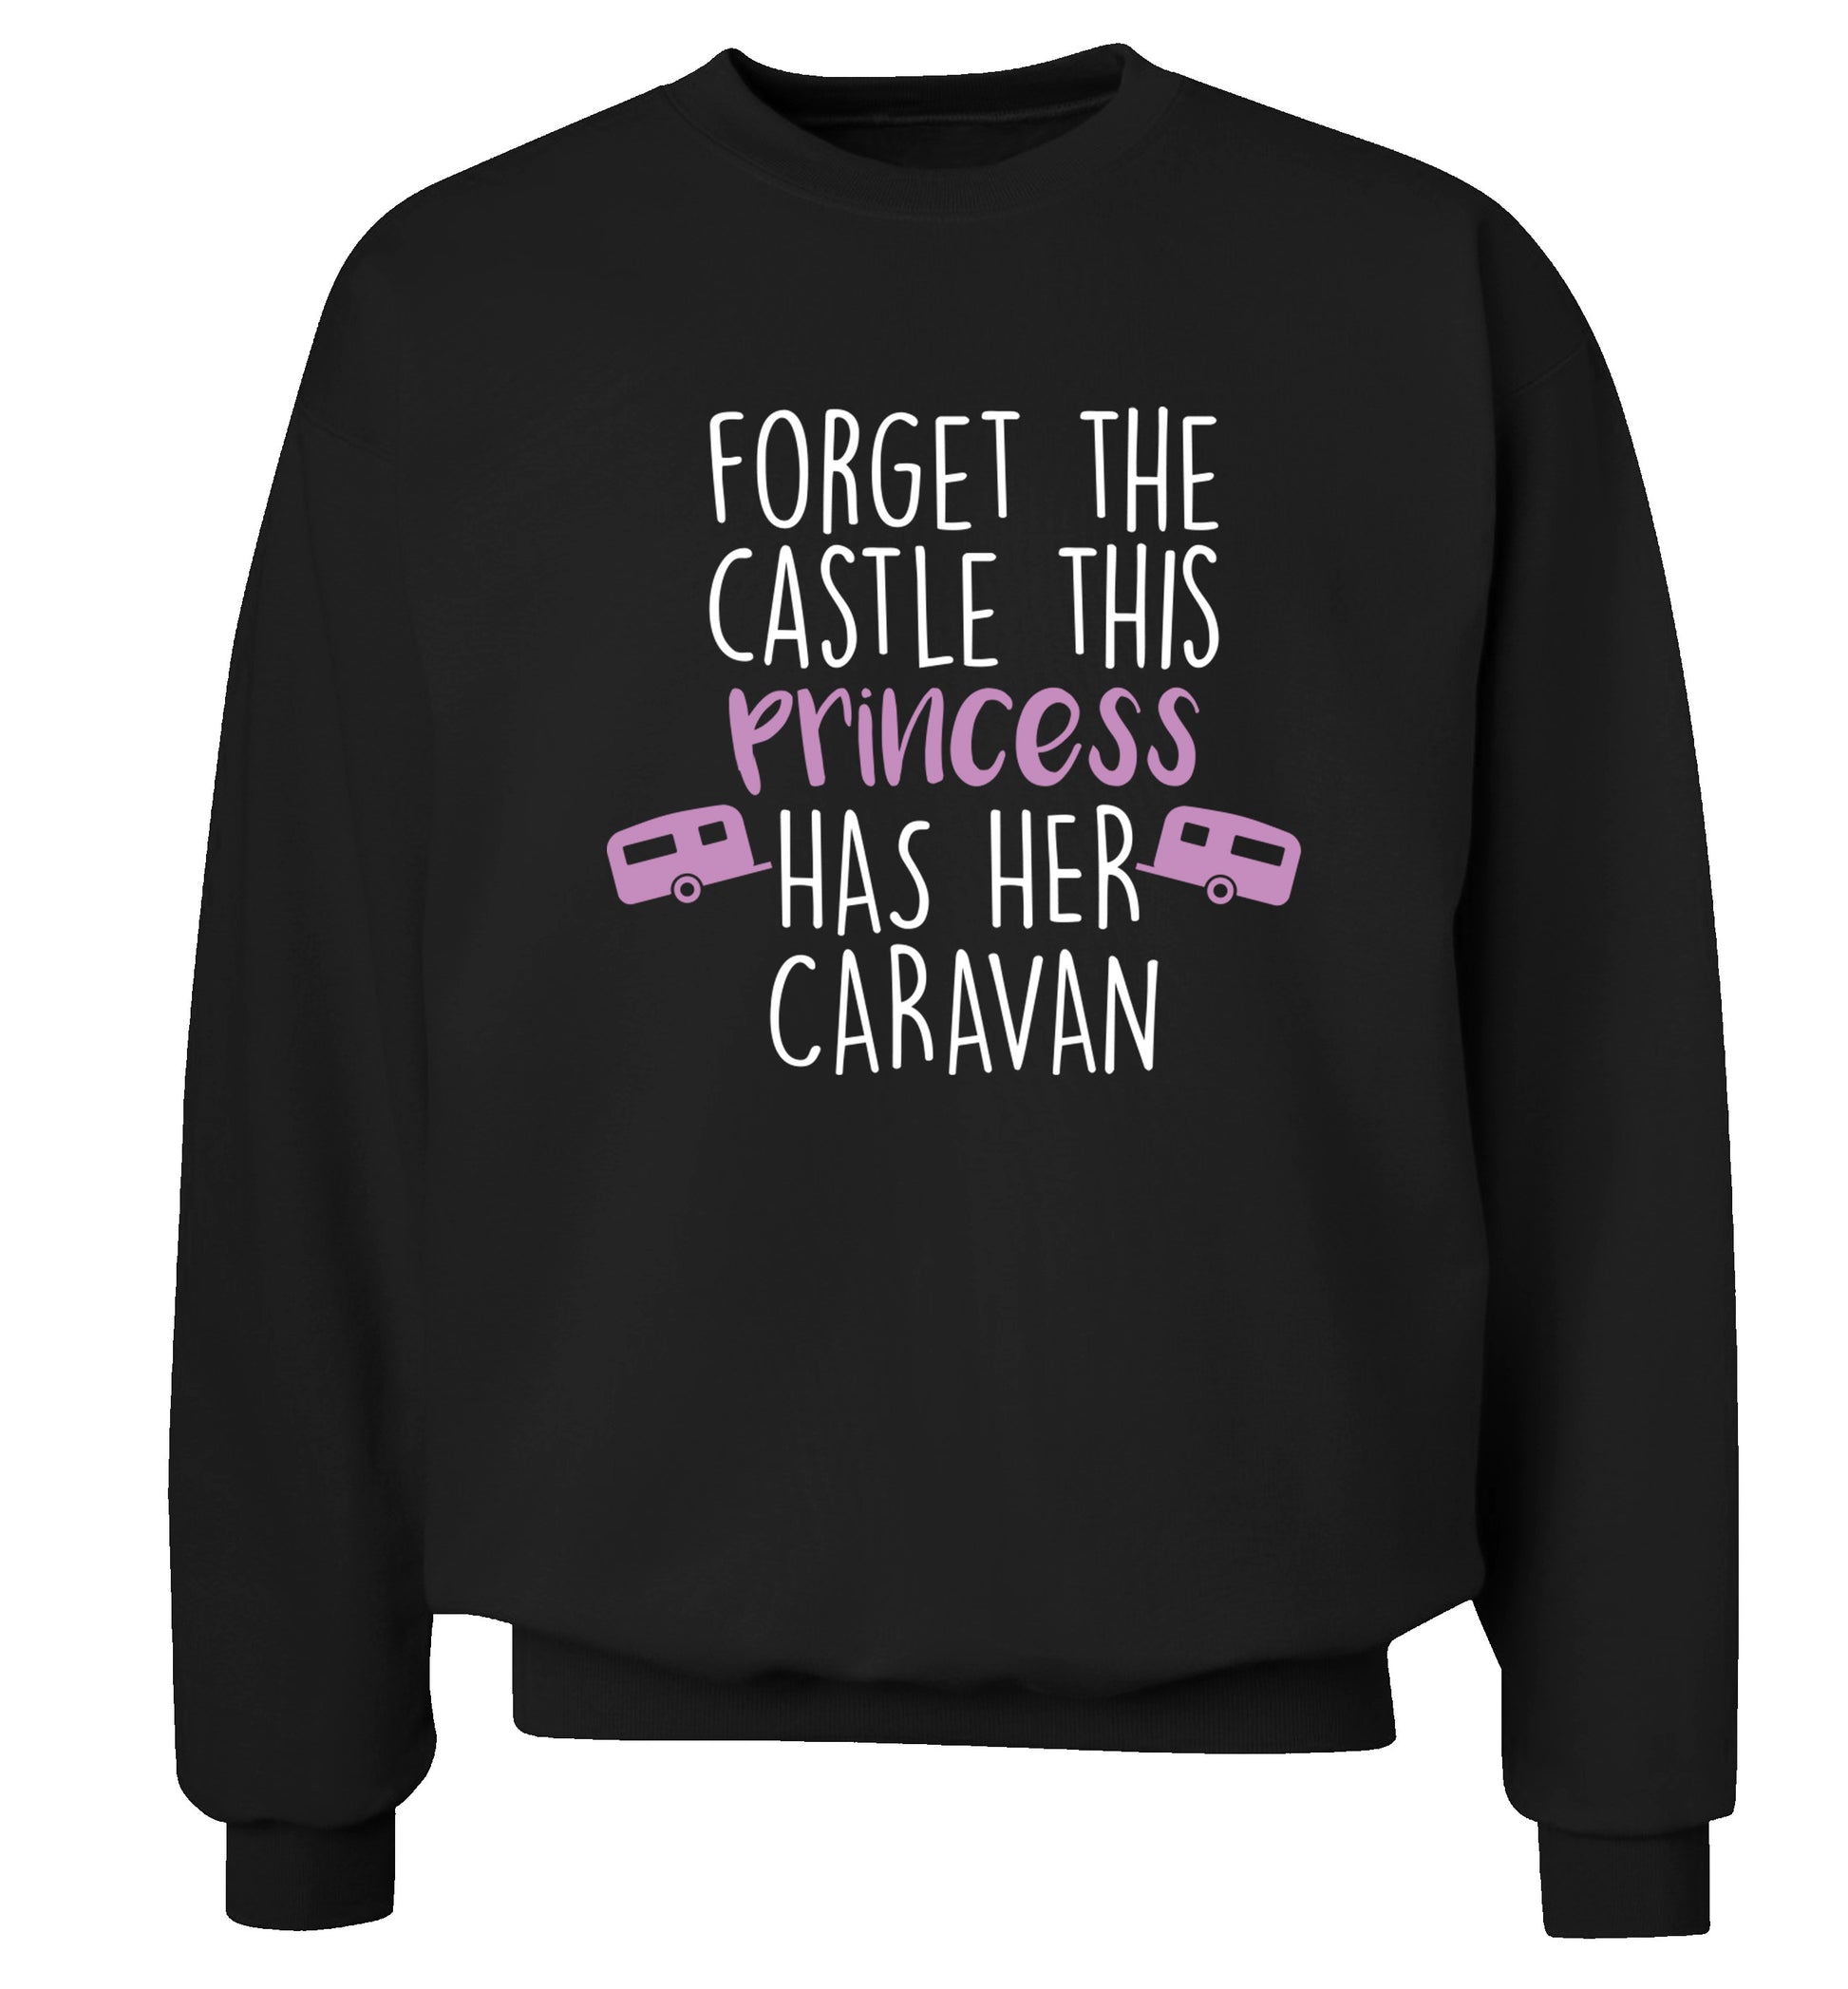 Forget the castle this princess lives at the caravan Adult's unisex black Sweater 2XL